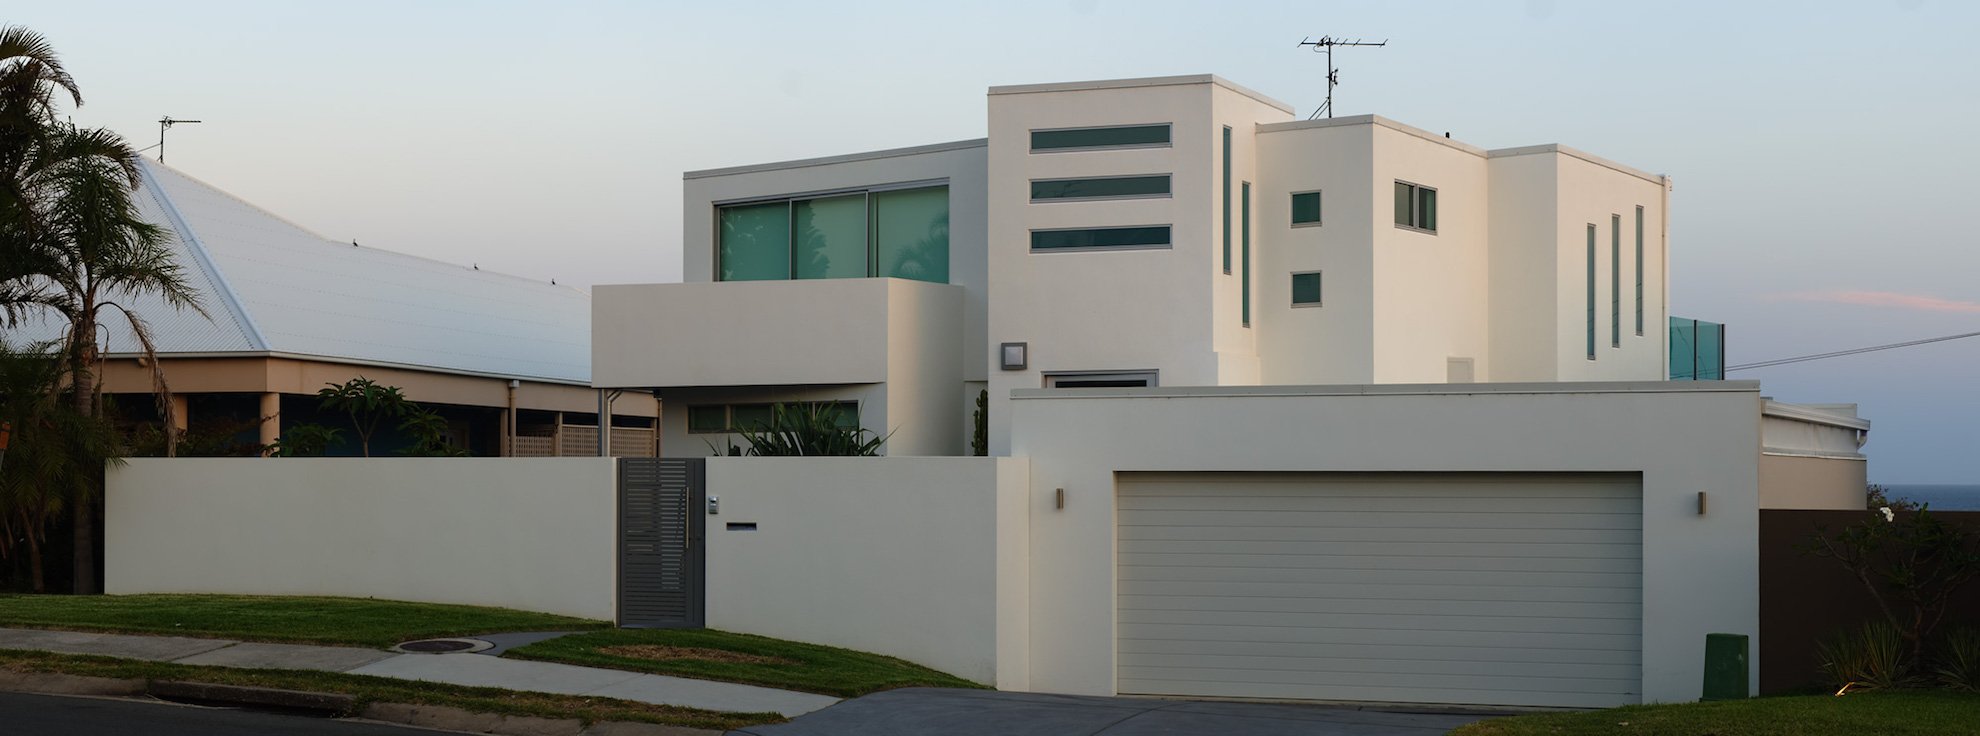 Orient Drive project by mdesign, a building design practice that operates on the Sunshine Coast.